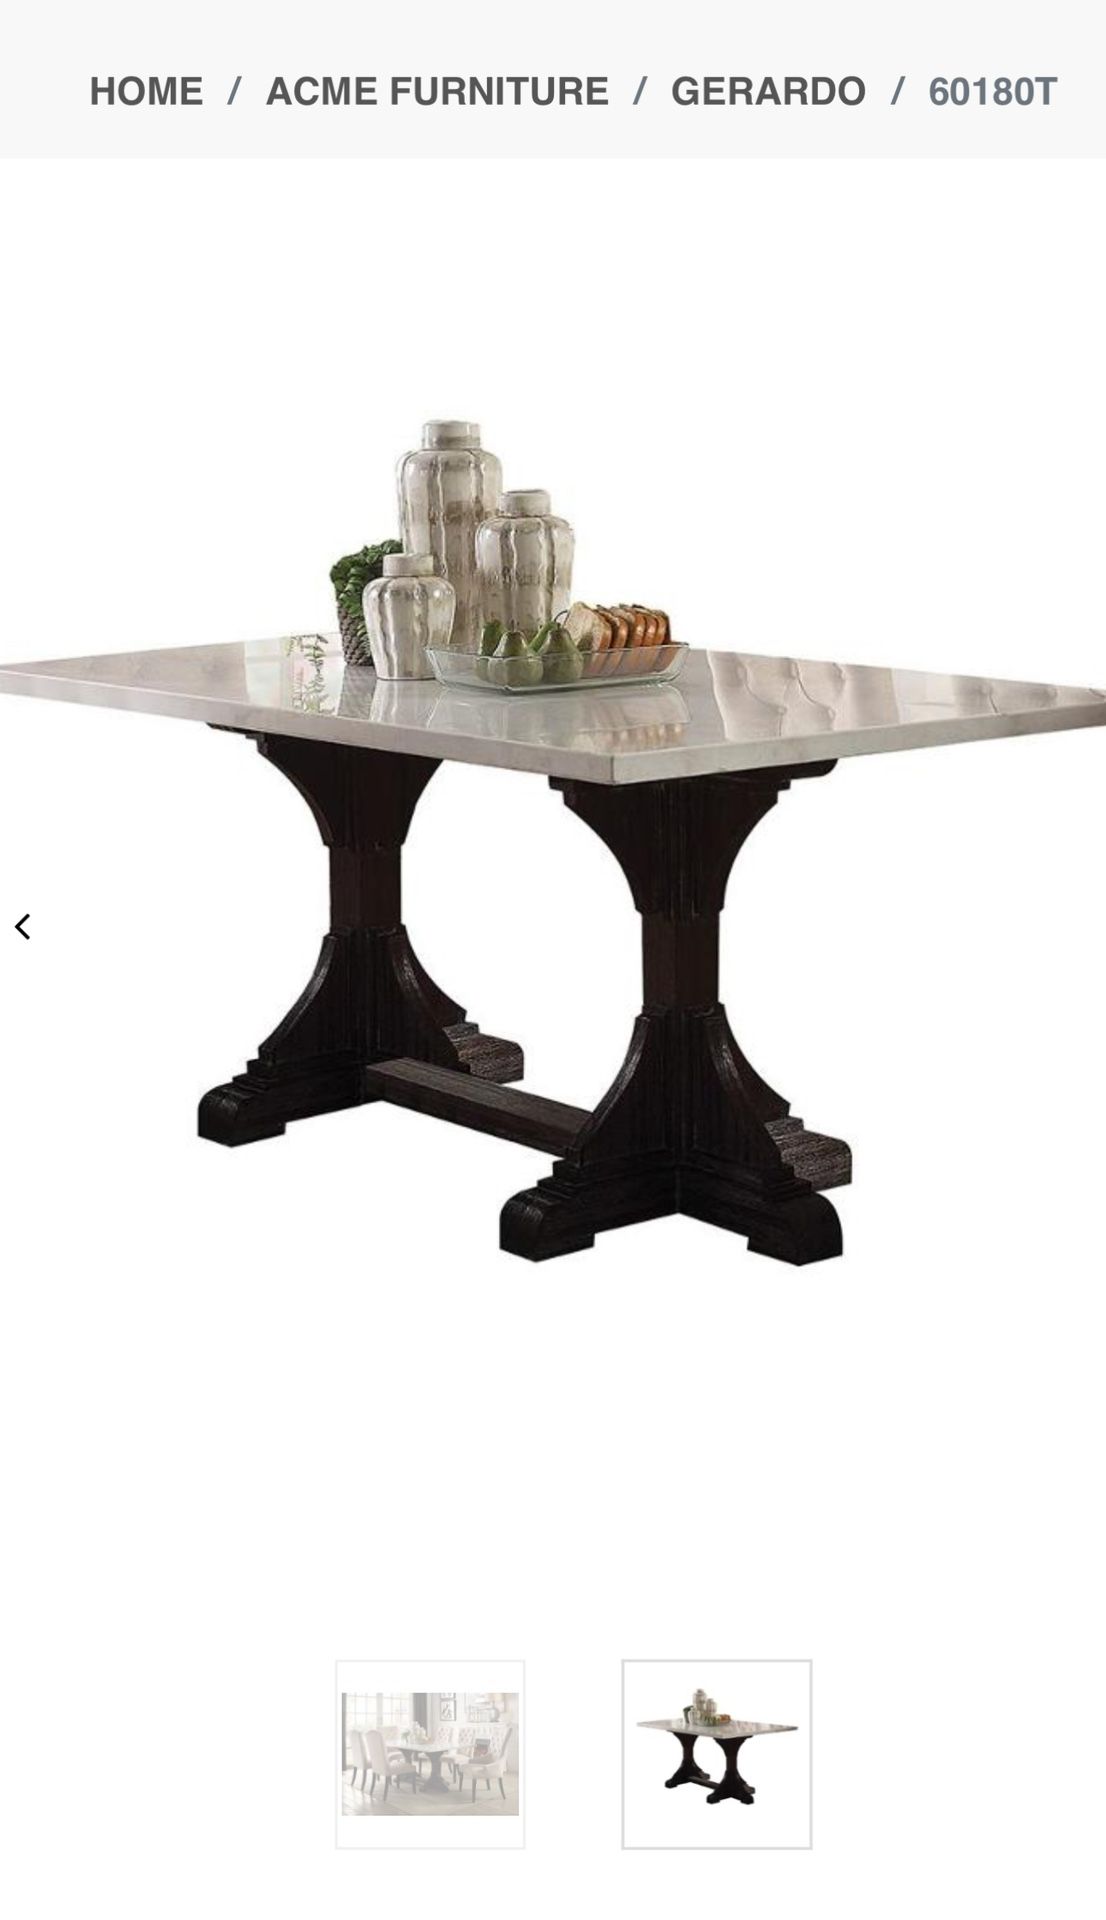 Smooth White Marble Dining Table By Gerardo By ACME